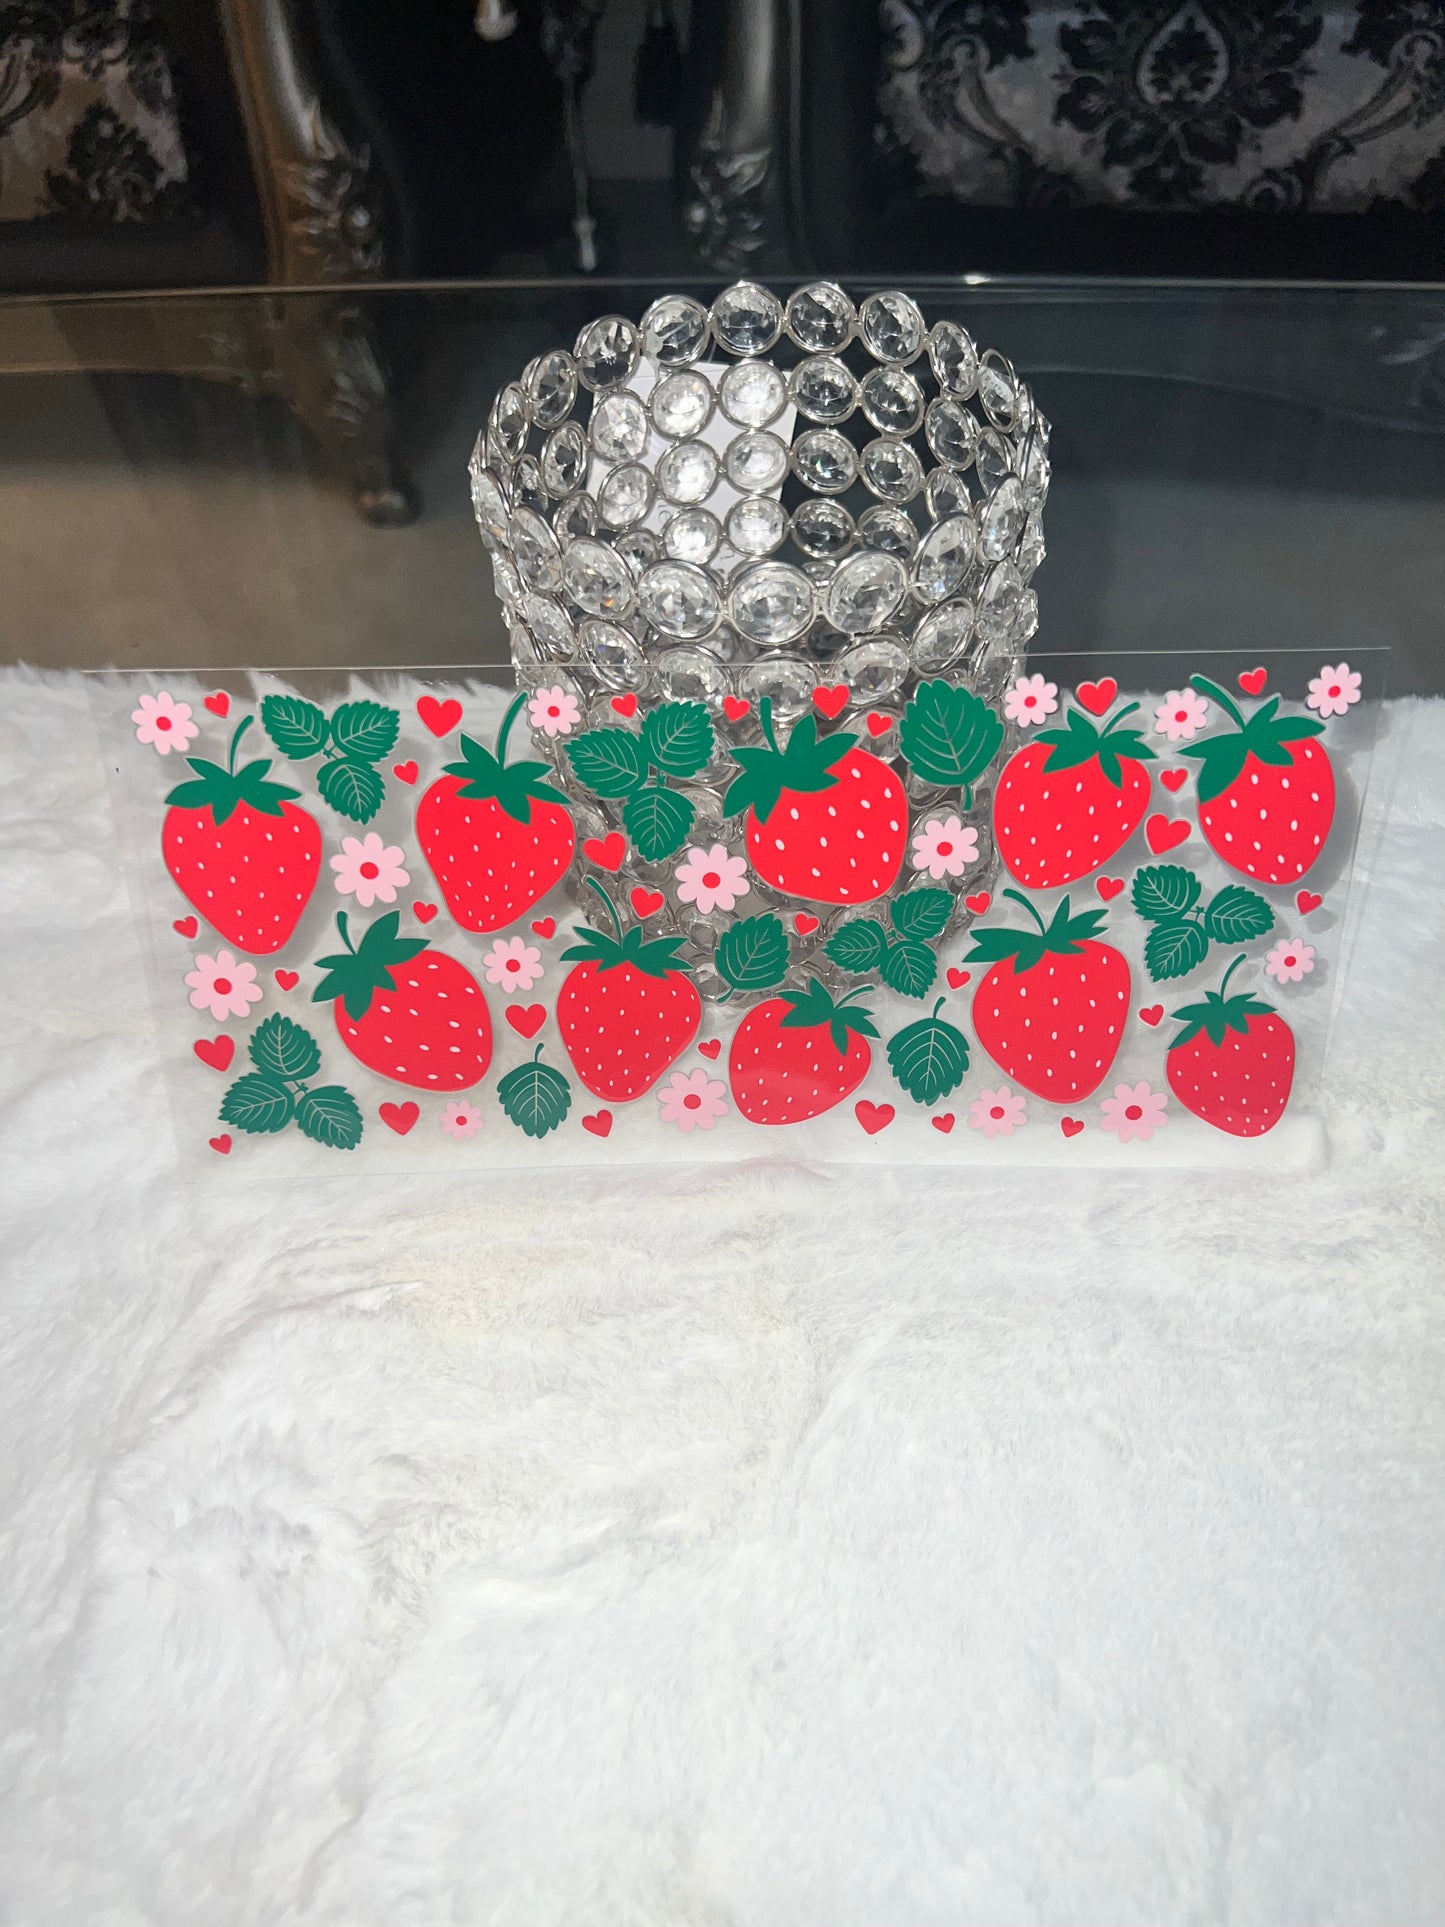 Strawberries daisy daisies 16oz cup wrap Ready to apply #368